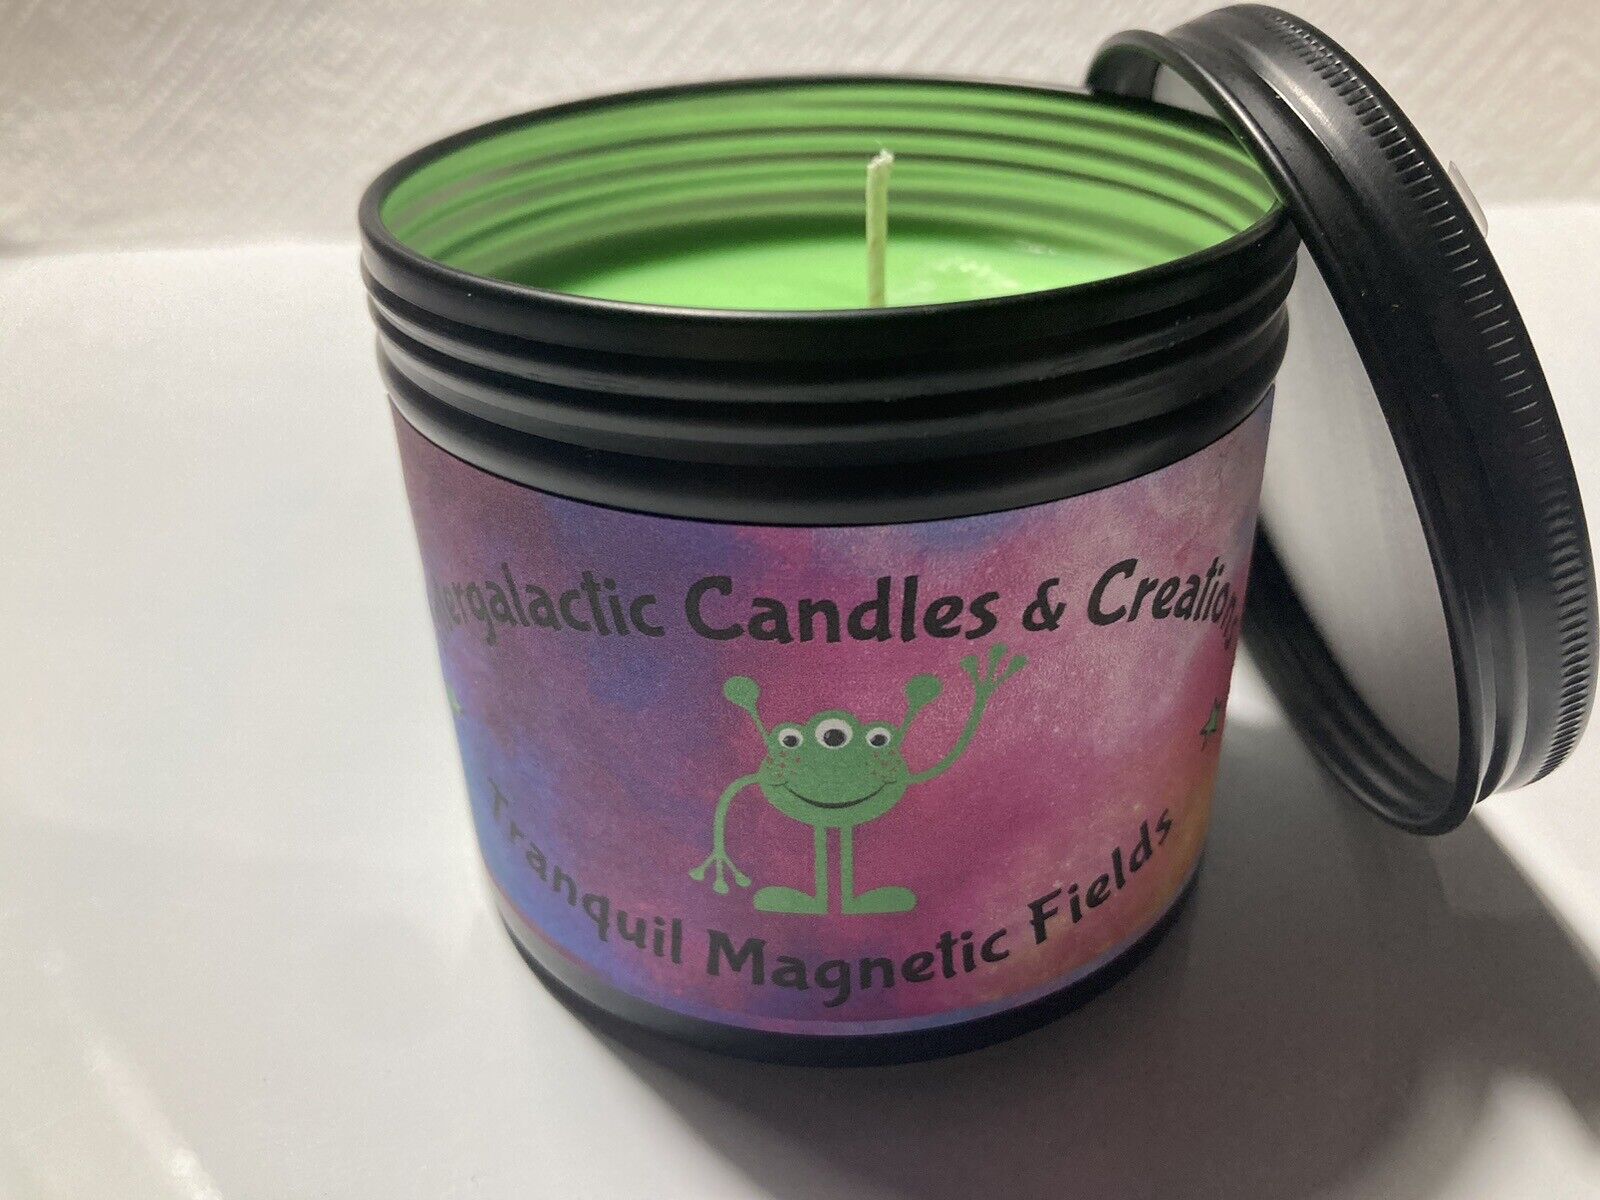 10 Oz Candle/ Intergalactic Candles & Creation/ Tranquil Magnetic Fields/ Bamboo